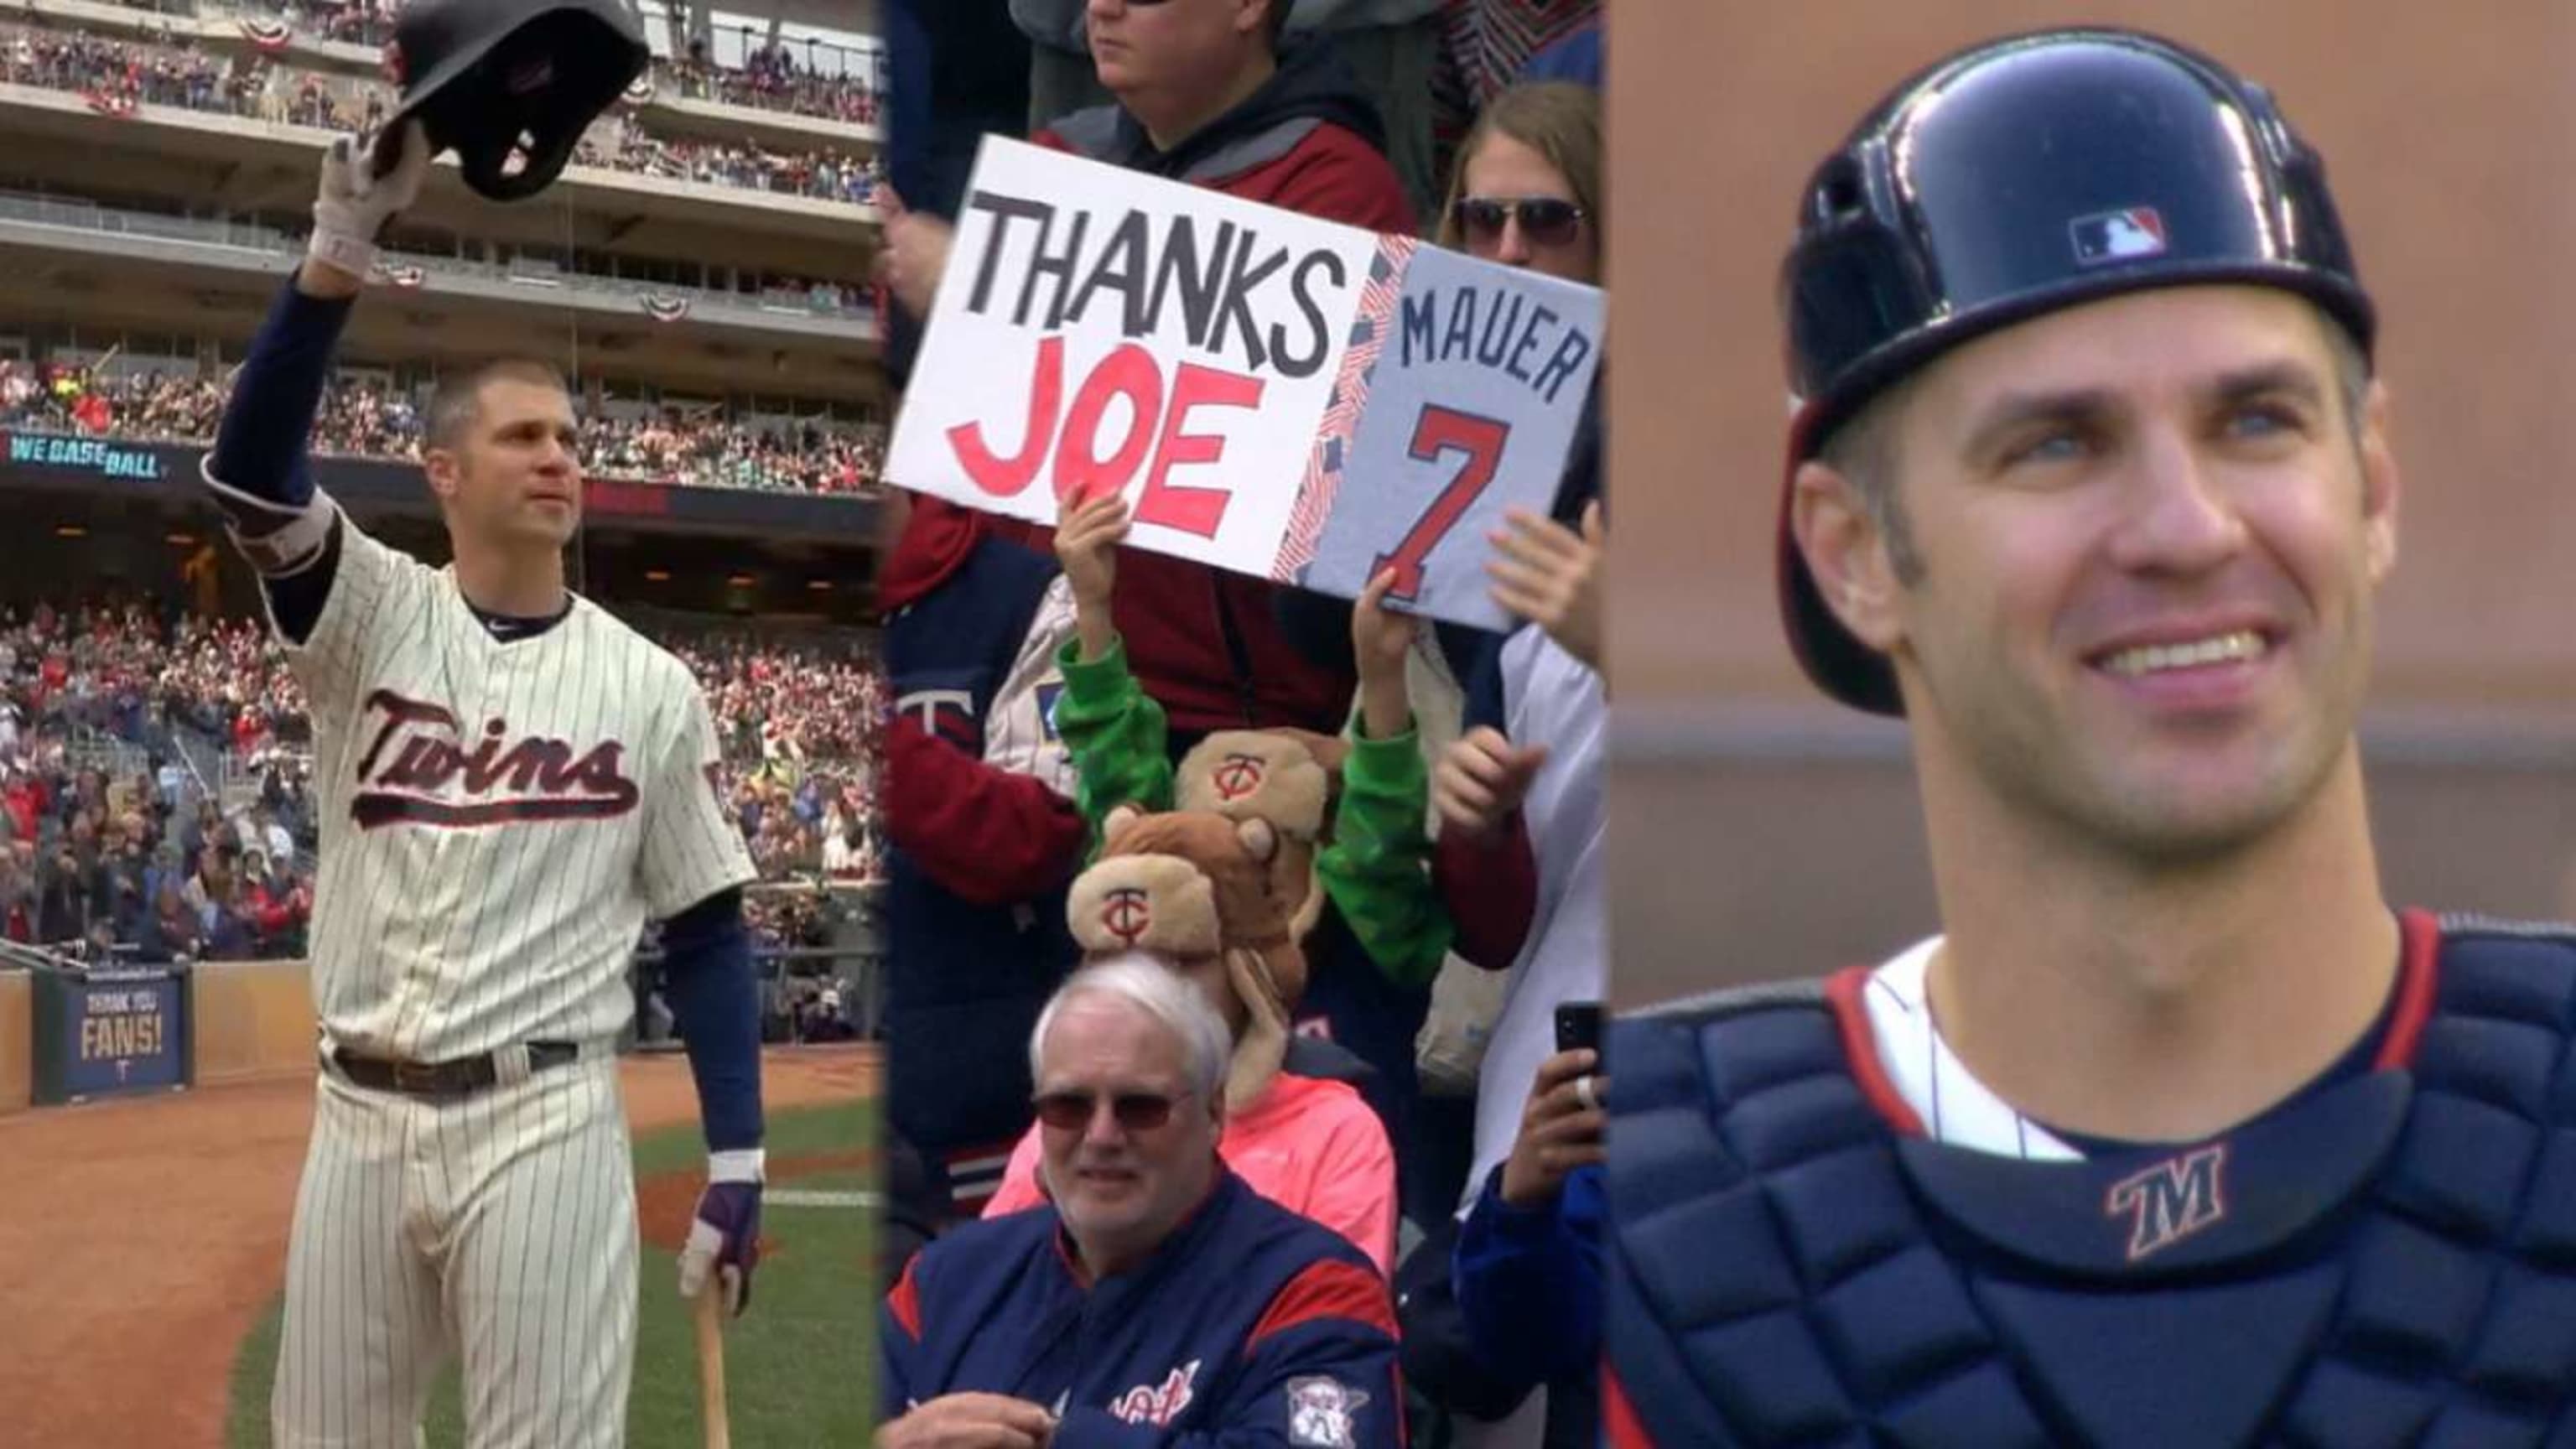 Joe Mauer Signed Minnesota Twins Jersey for sale at auction from 13th  October to 31st October